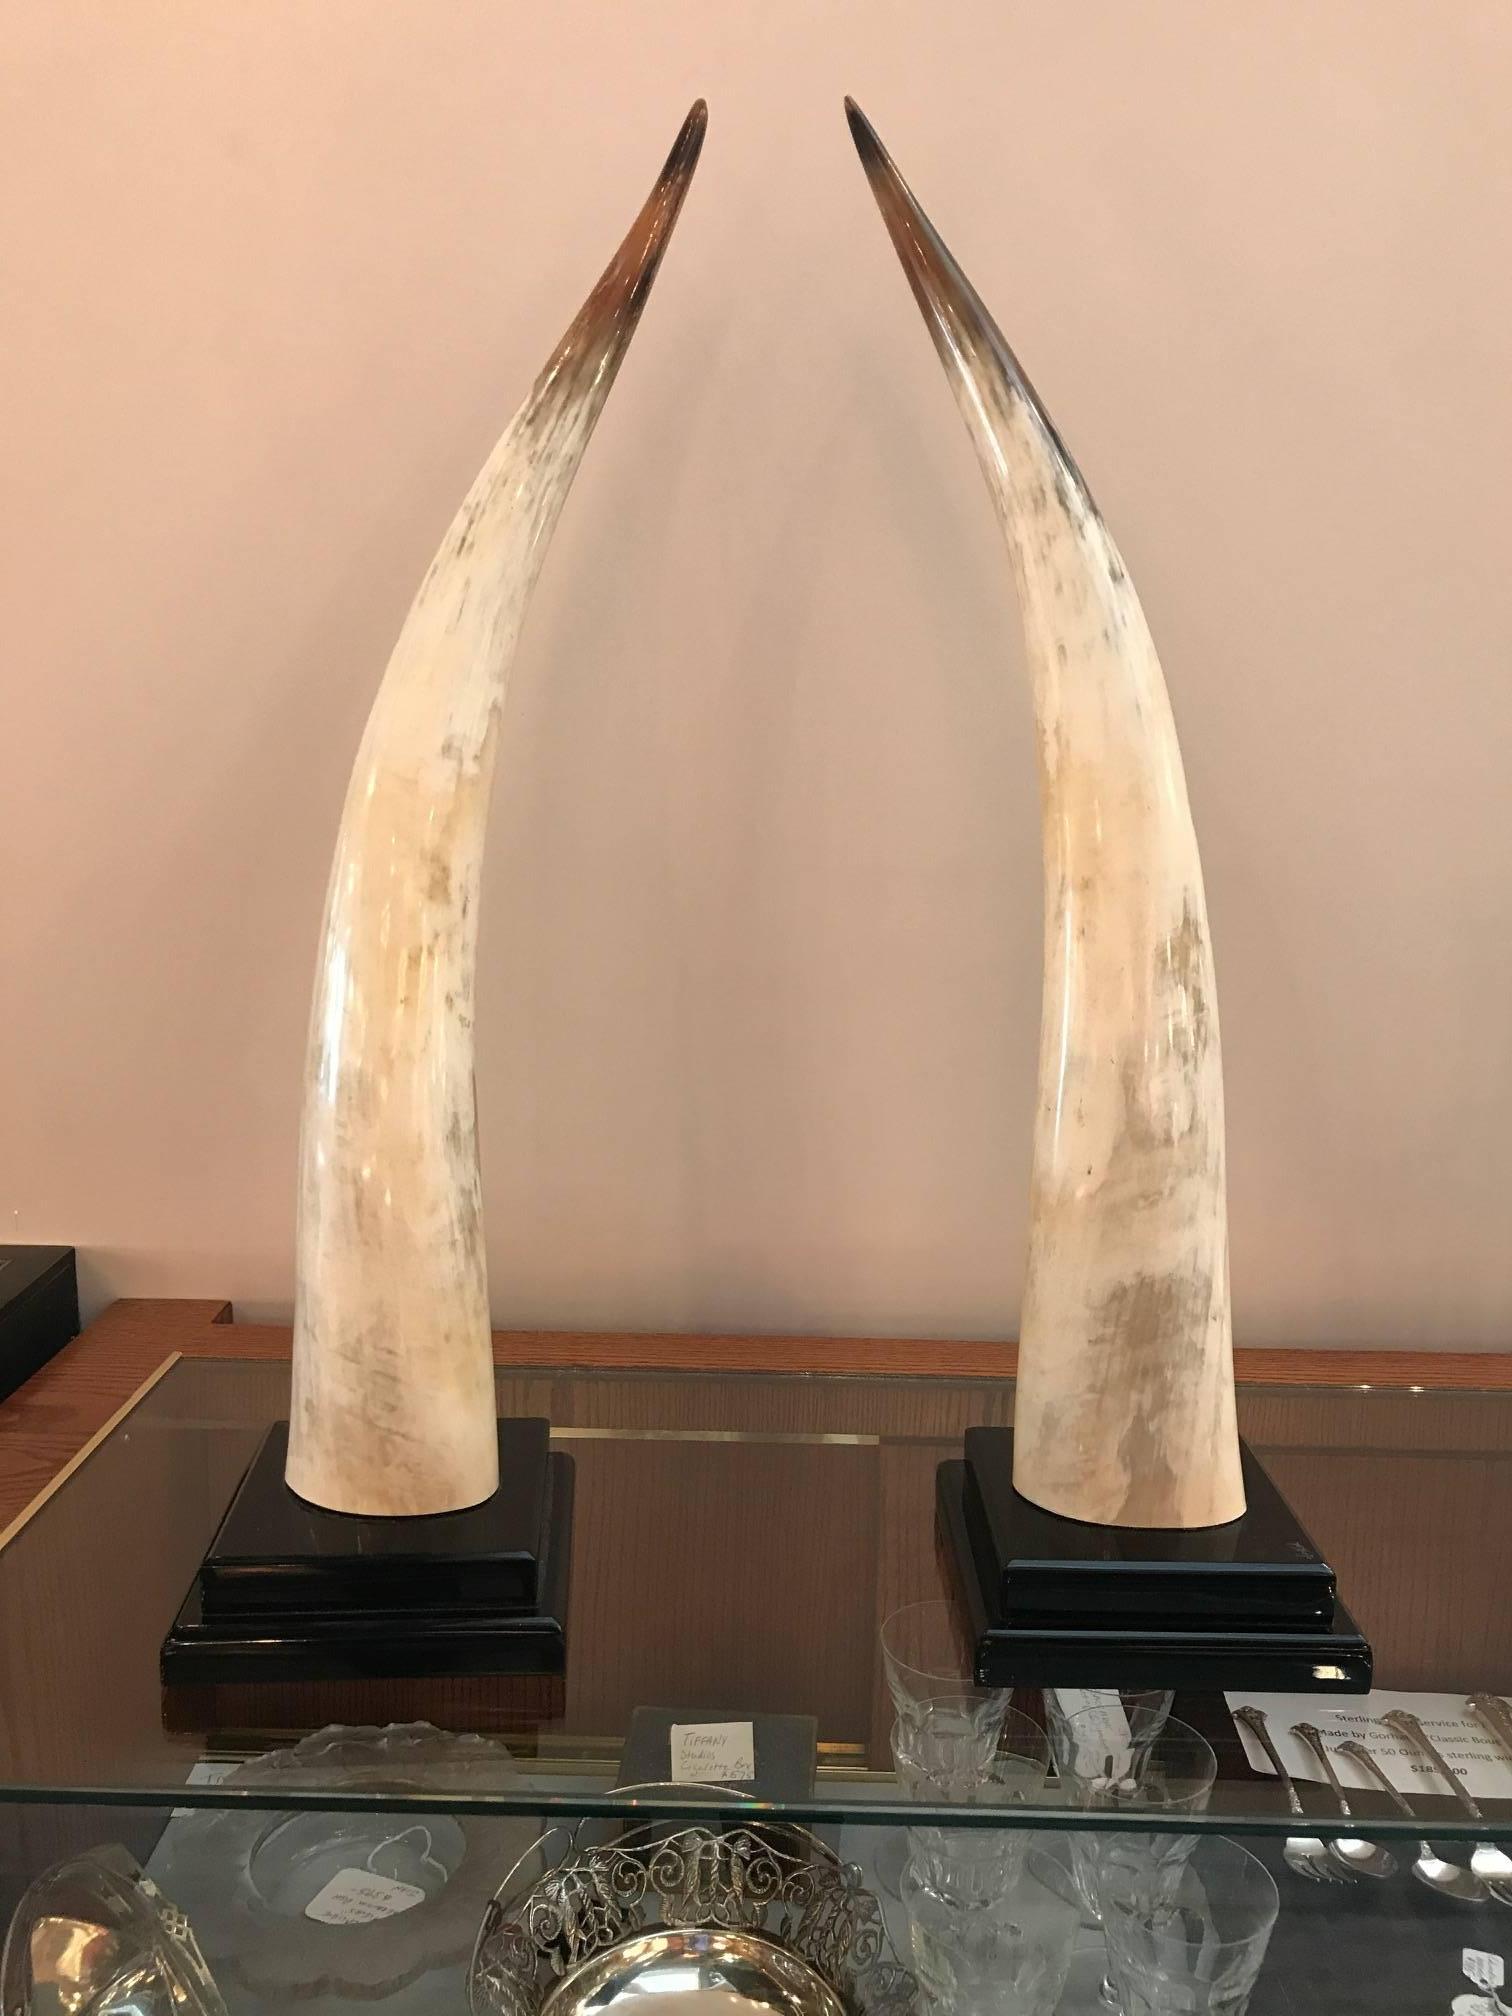 Stylish pair of steer horns mounted on black Lucite bases. Each one inscribed Van Teal on bases.